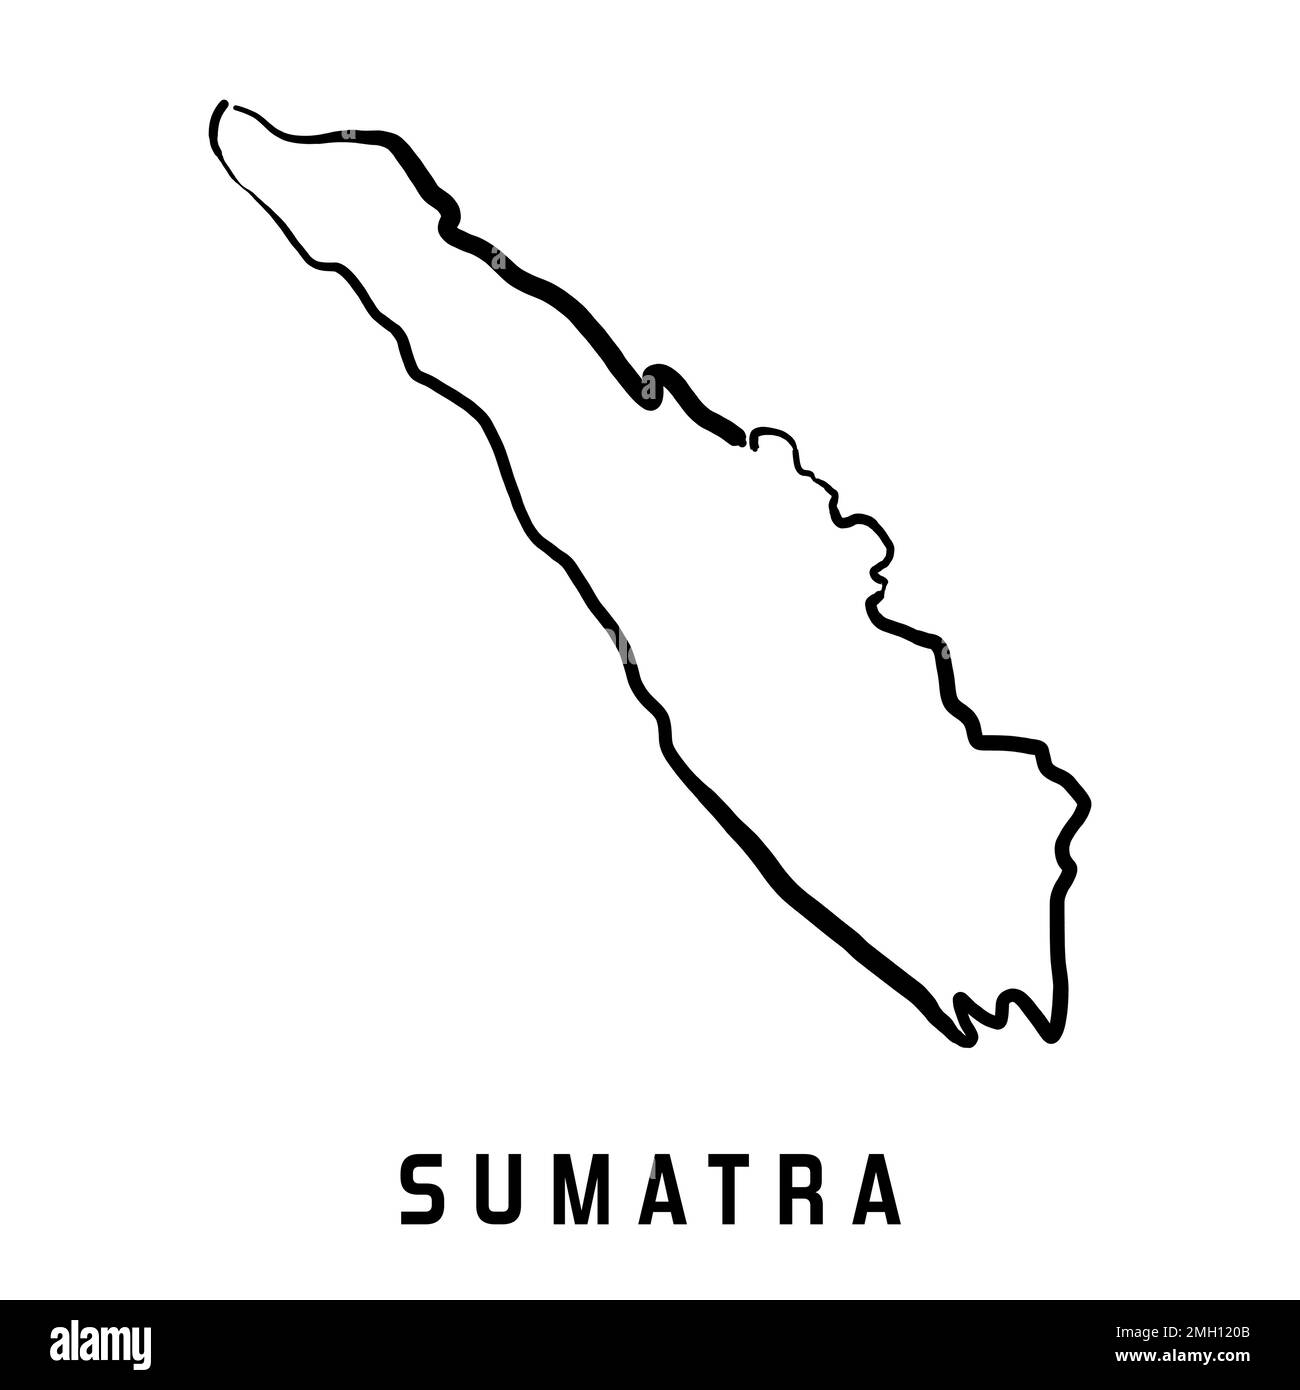 Sumatra island map in Indonesia. Simple outline. Vector hand drawn simplified style map. Stock Vector